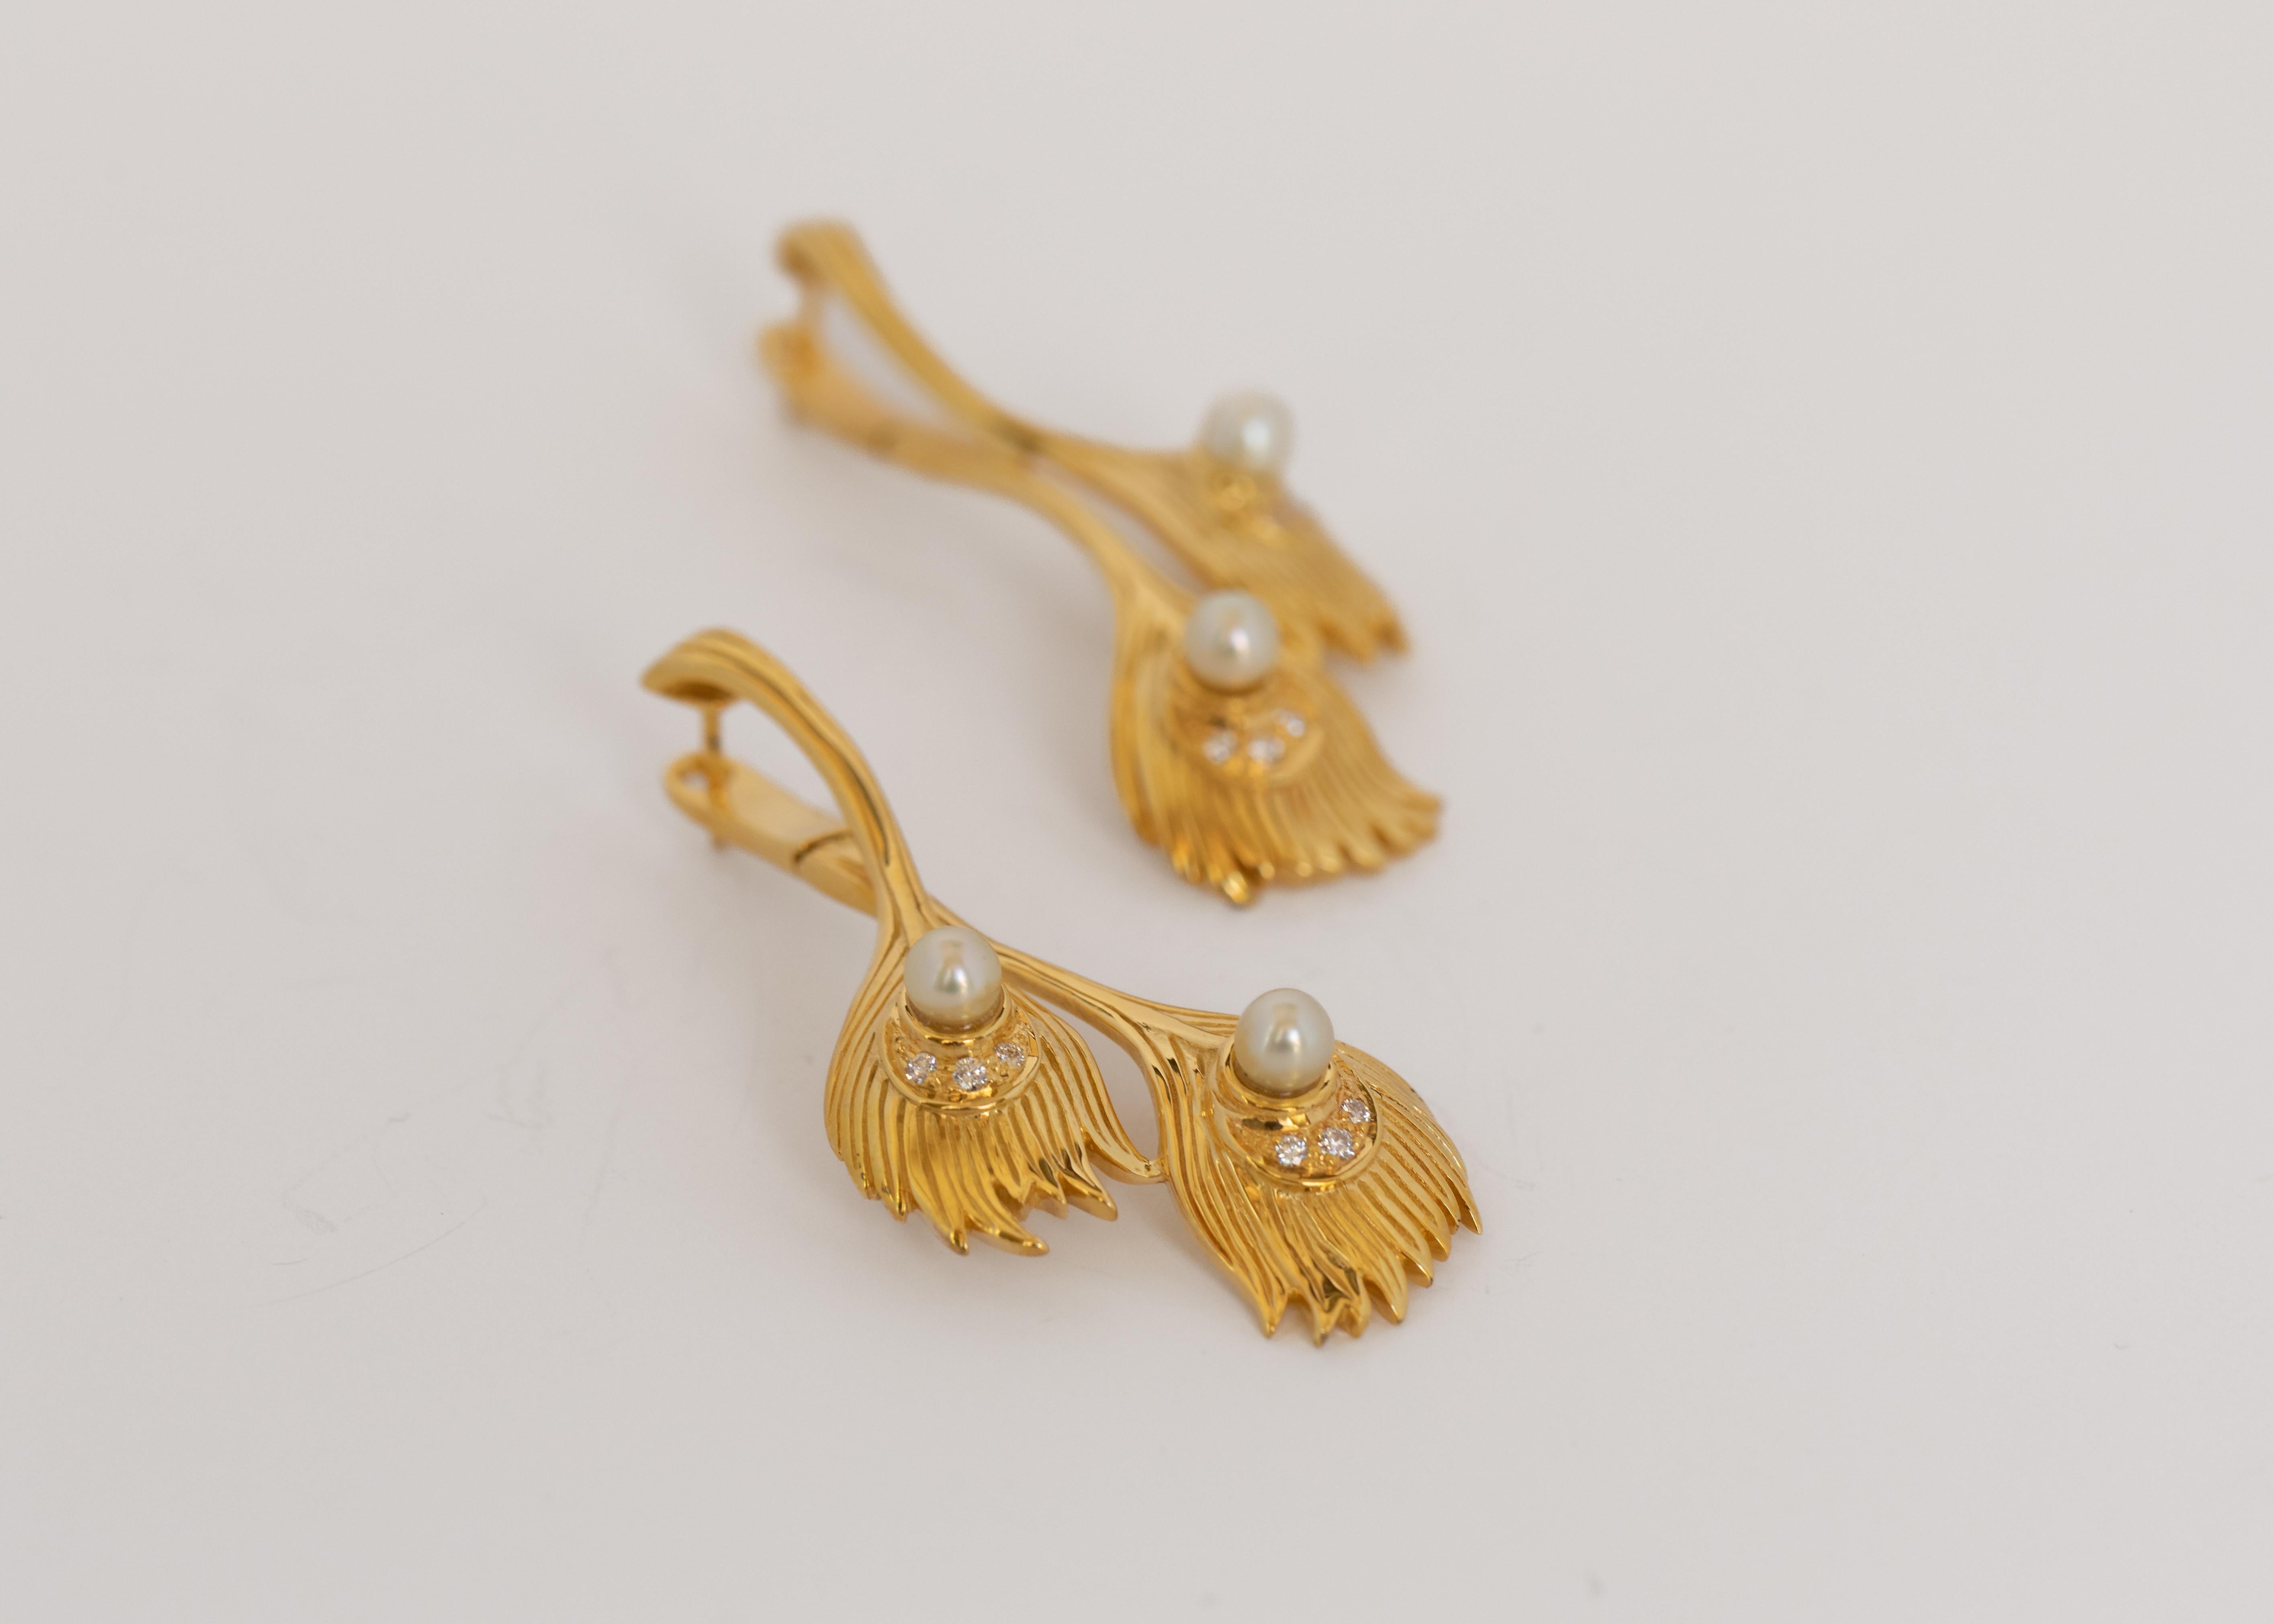 Those earrings are one of a kind.
The beauty of this piece lies in the intricacy and details on its facade.
The 2 connected leaves fall gracefully from the ears.
The earrings are in 18 karat yellow gold, centered with lustrous natural Bahraini